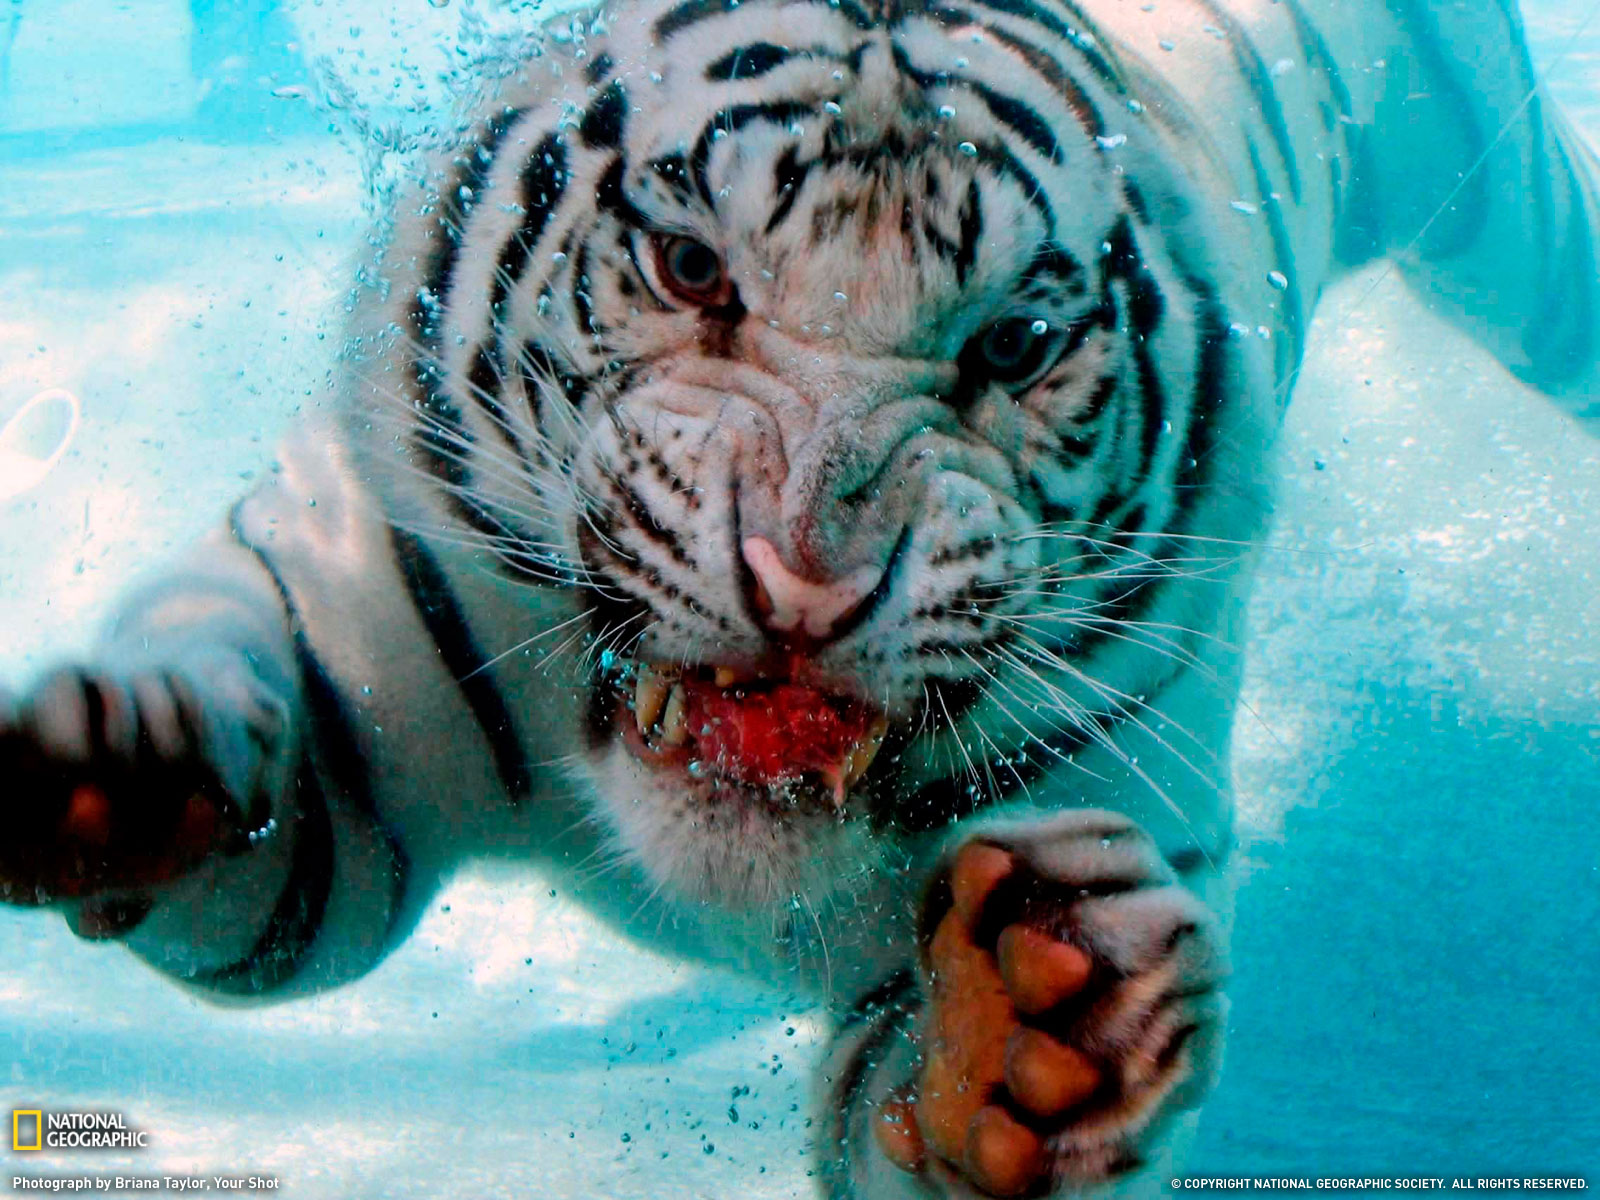  Tiger Photo Animal Wallpaper   National Geographic Photo of the Day